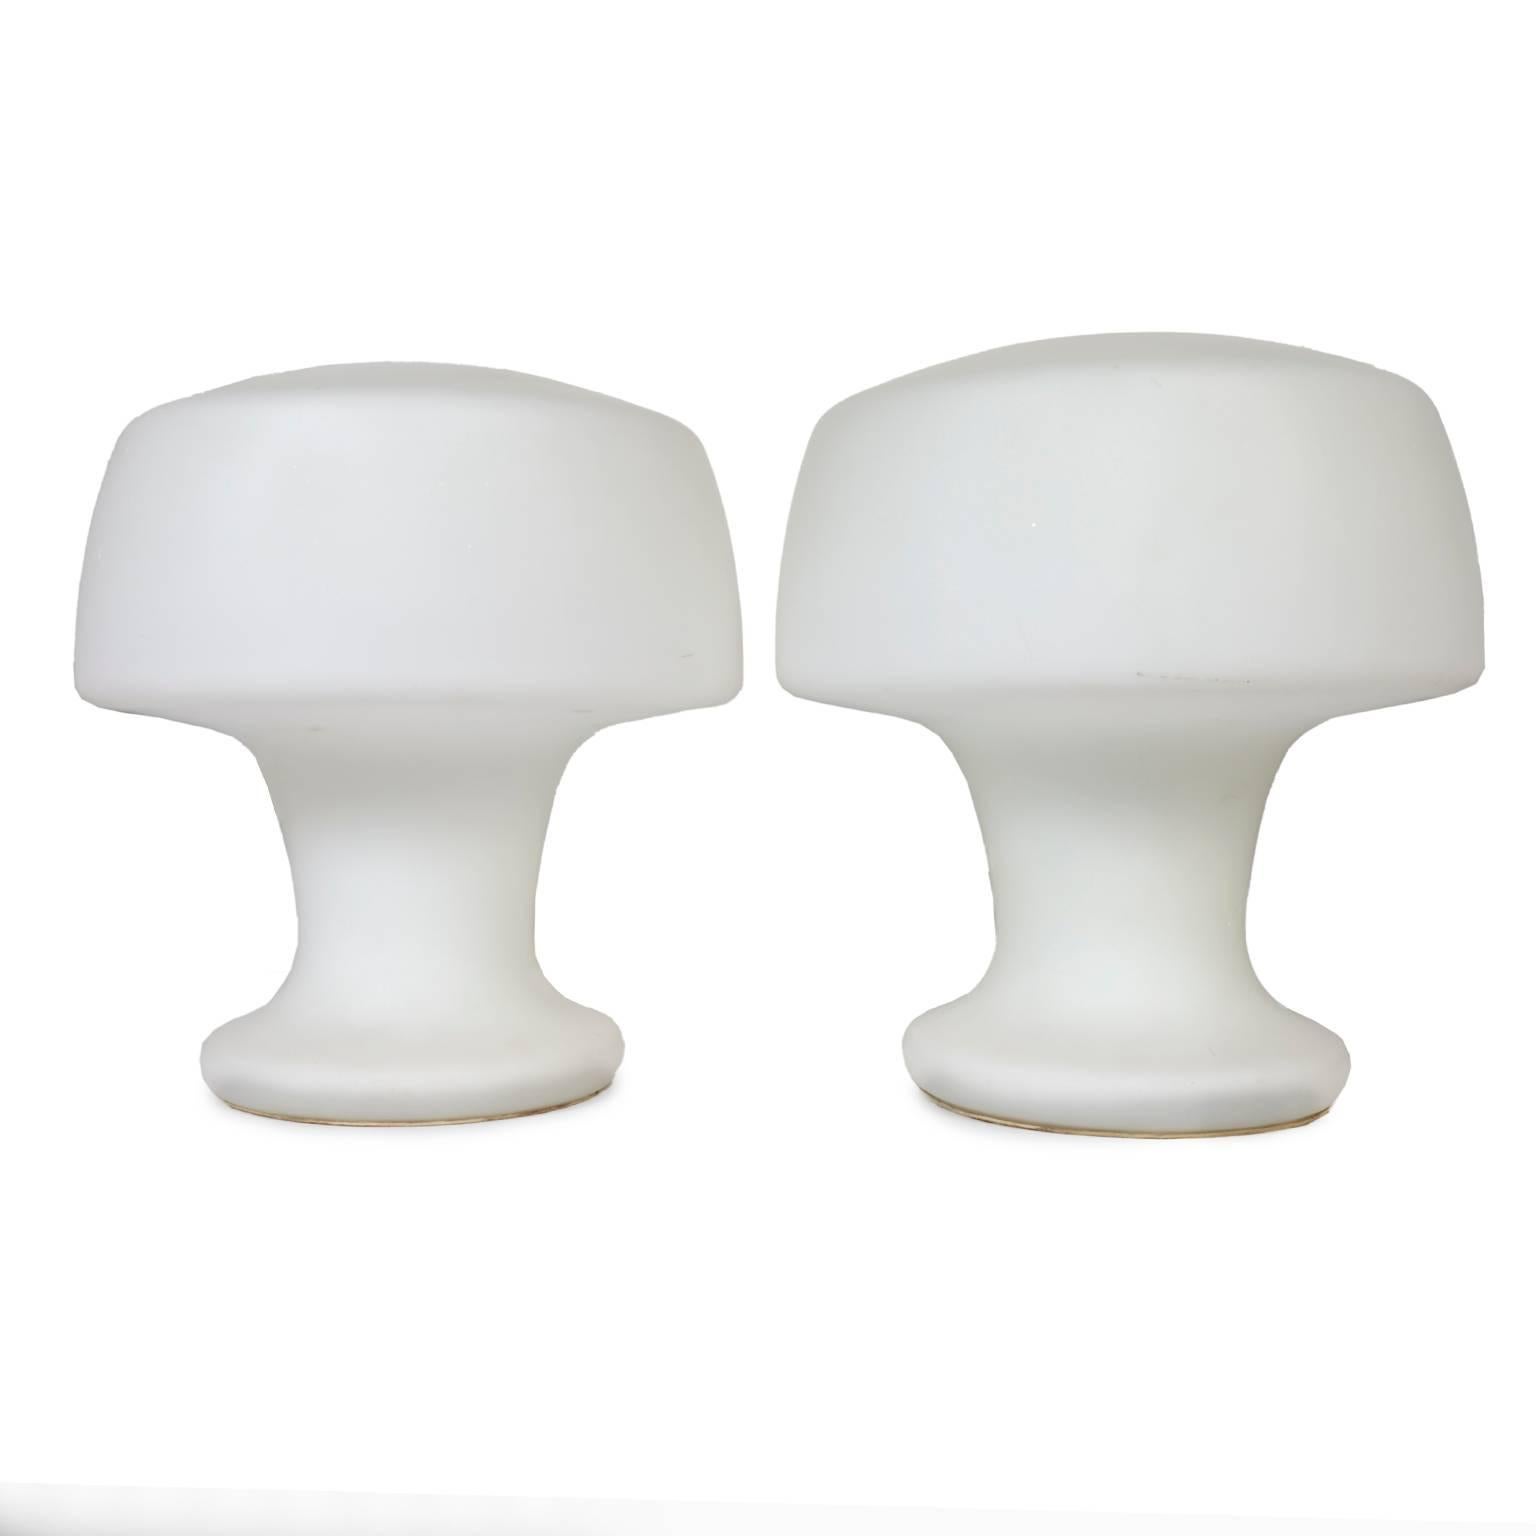 Pair of vintage Laurel Mushroom lamps made of frosted glass.